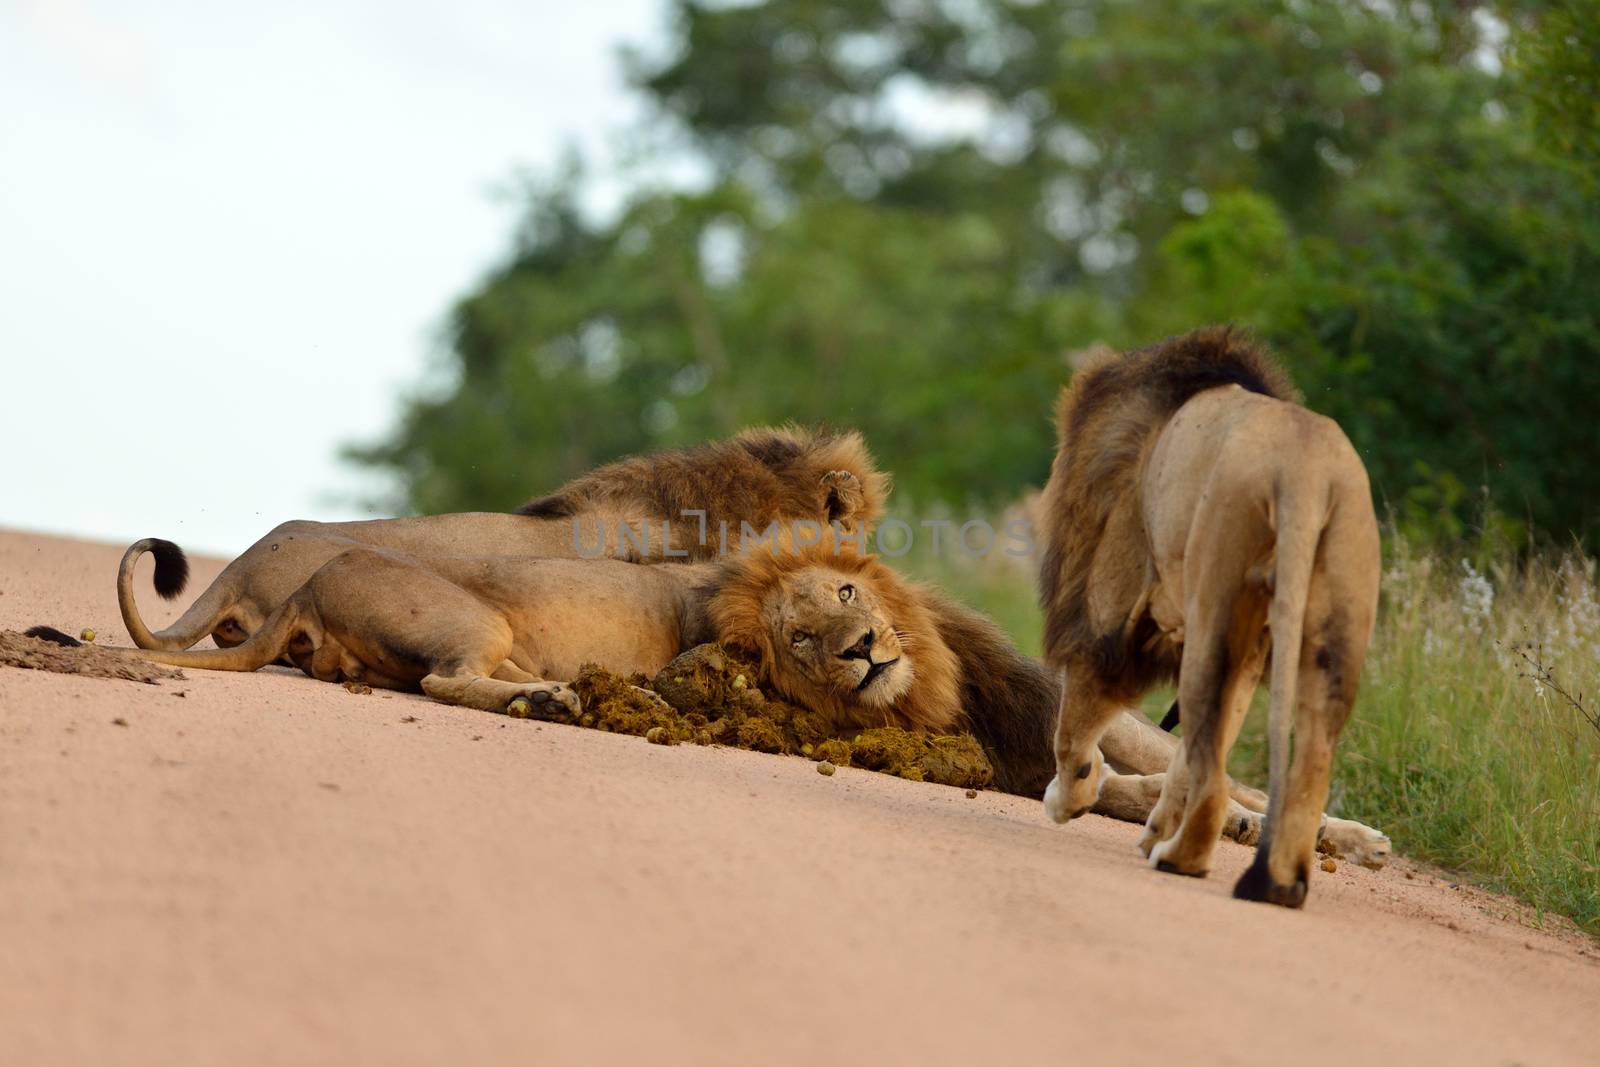 Male lions in the wilderness of Africa by ozkanzozmen